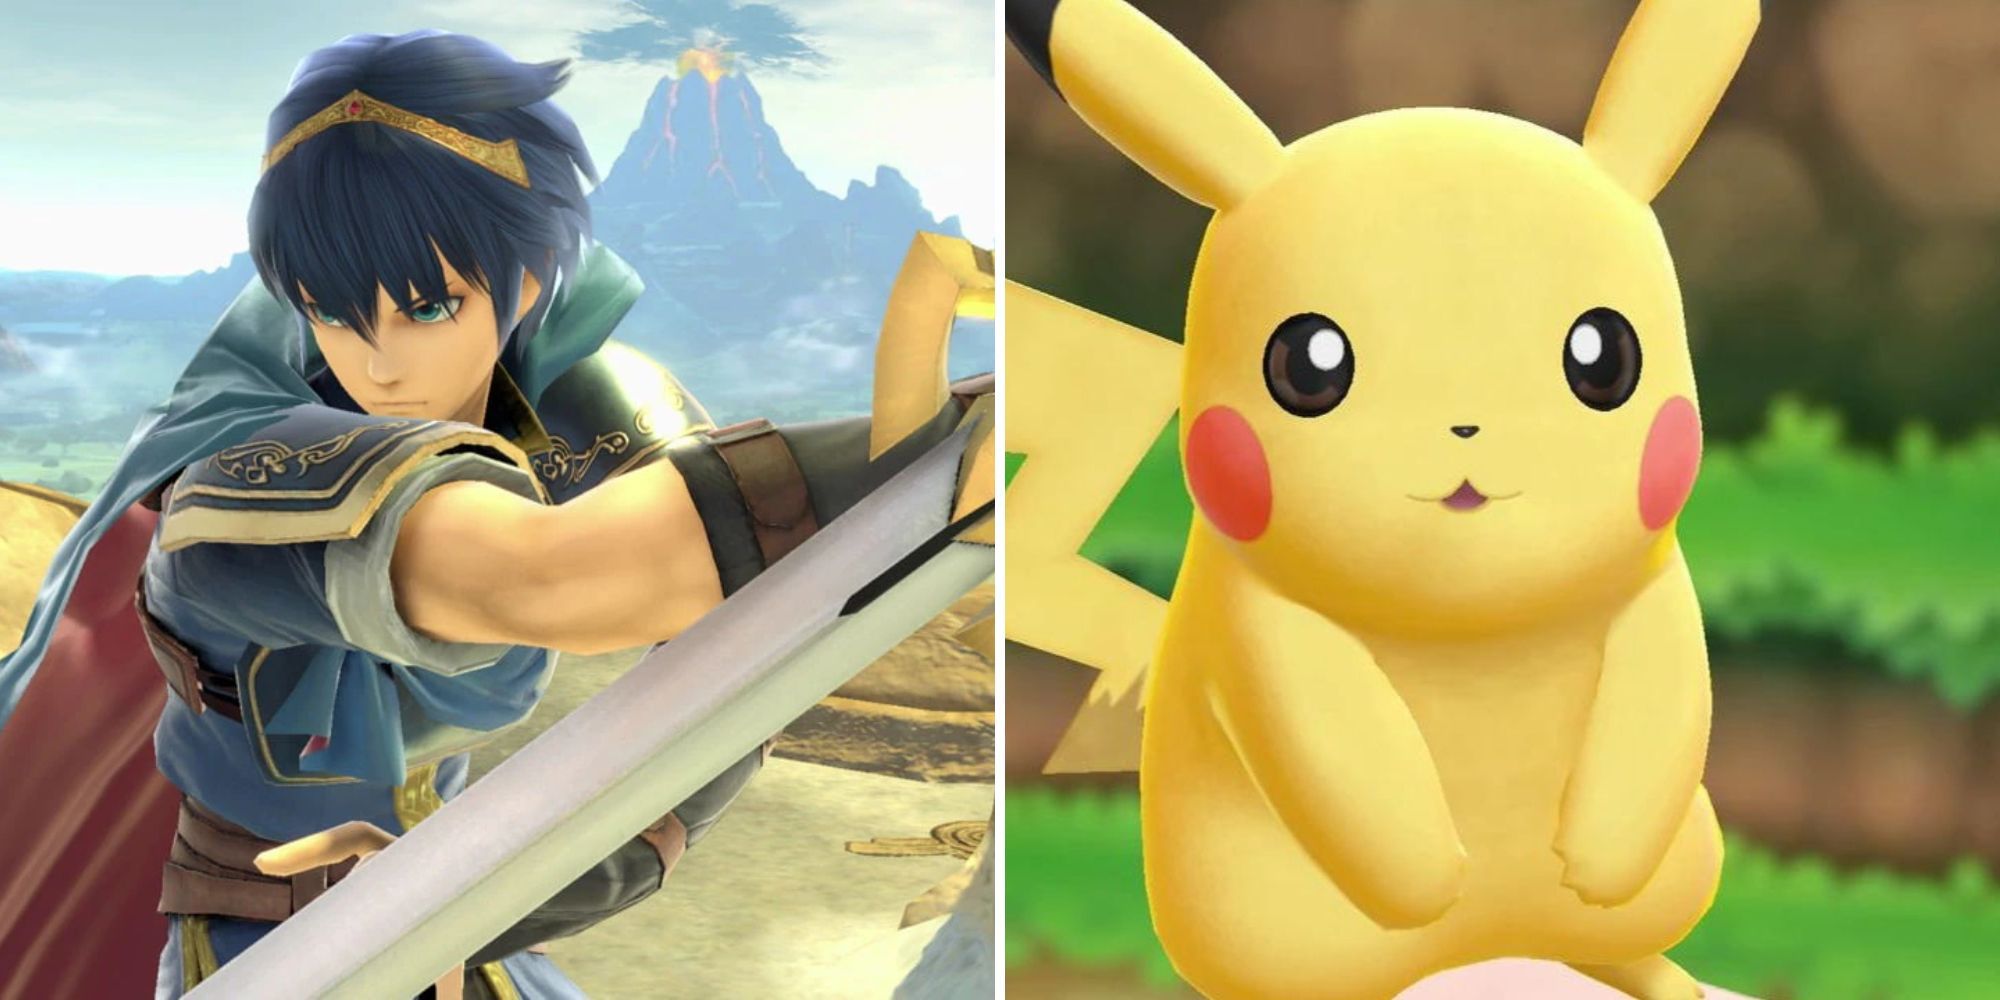 Marth prepares to attack and Pikachu stands on it's trainers arm